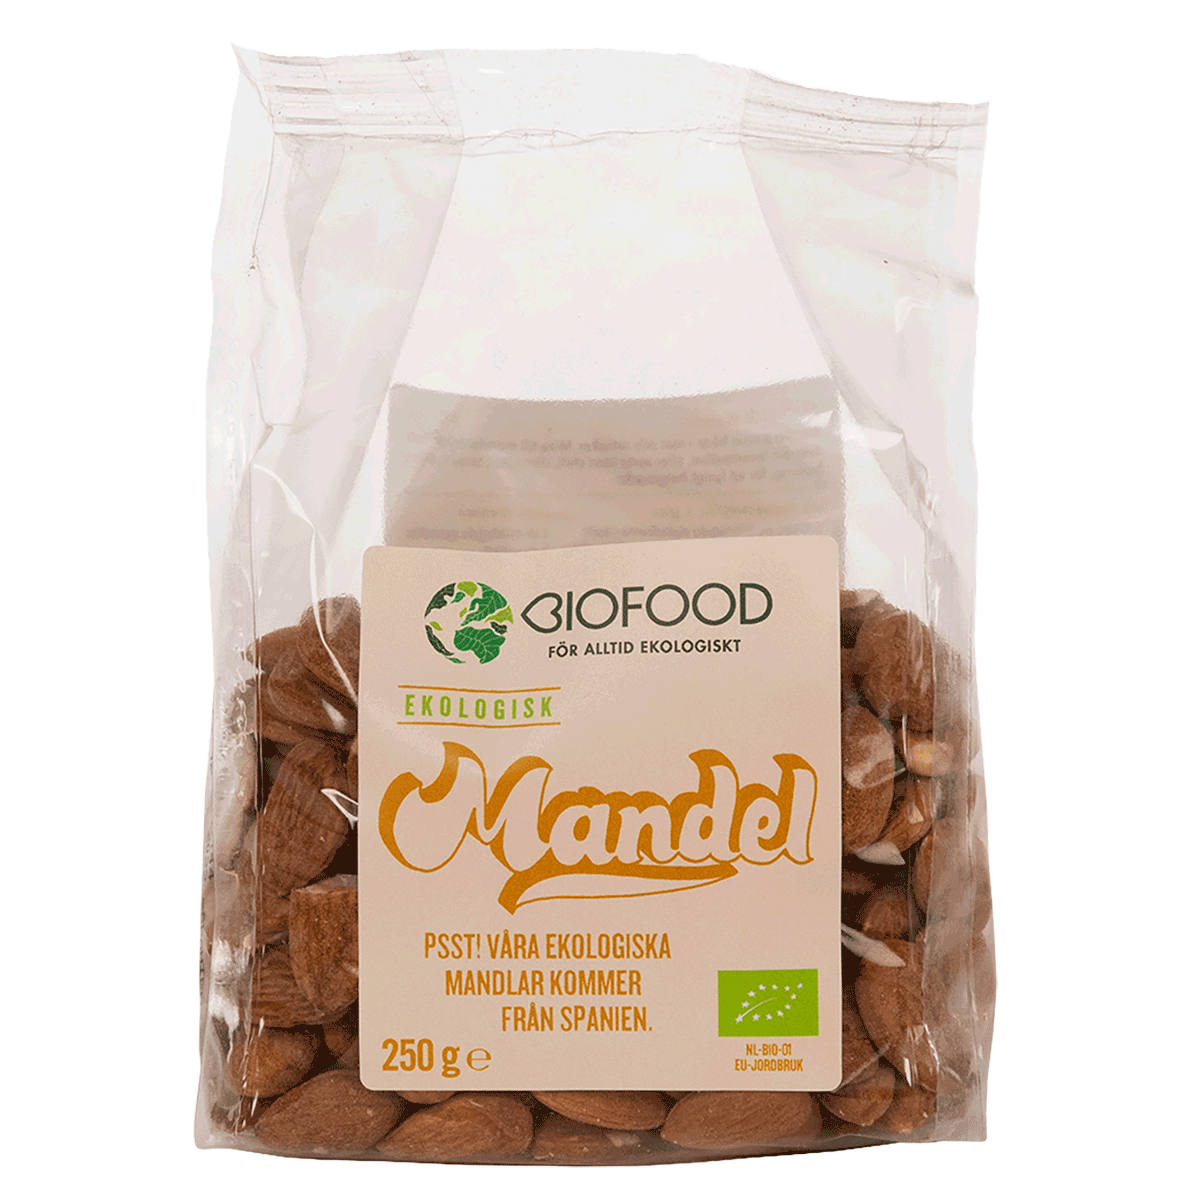 Almond from Biofood